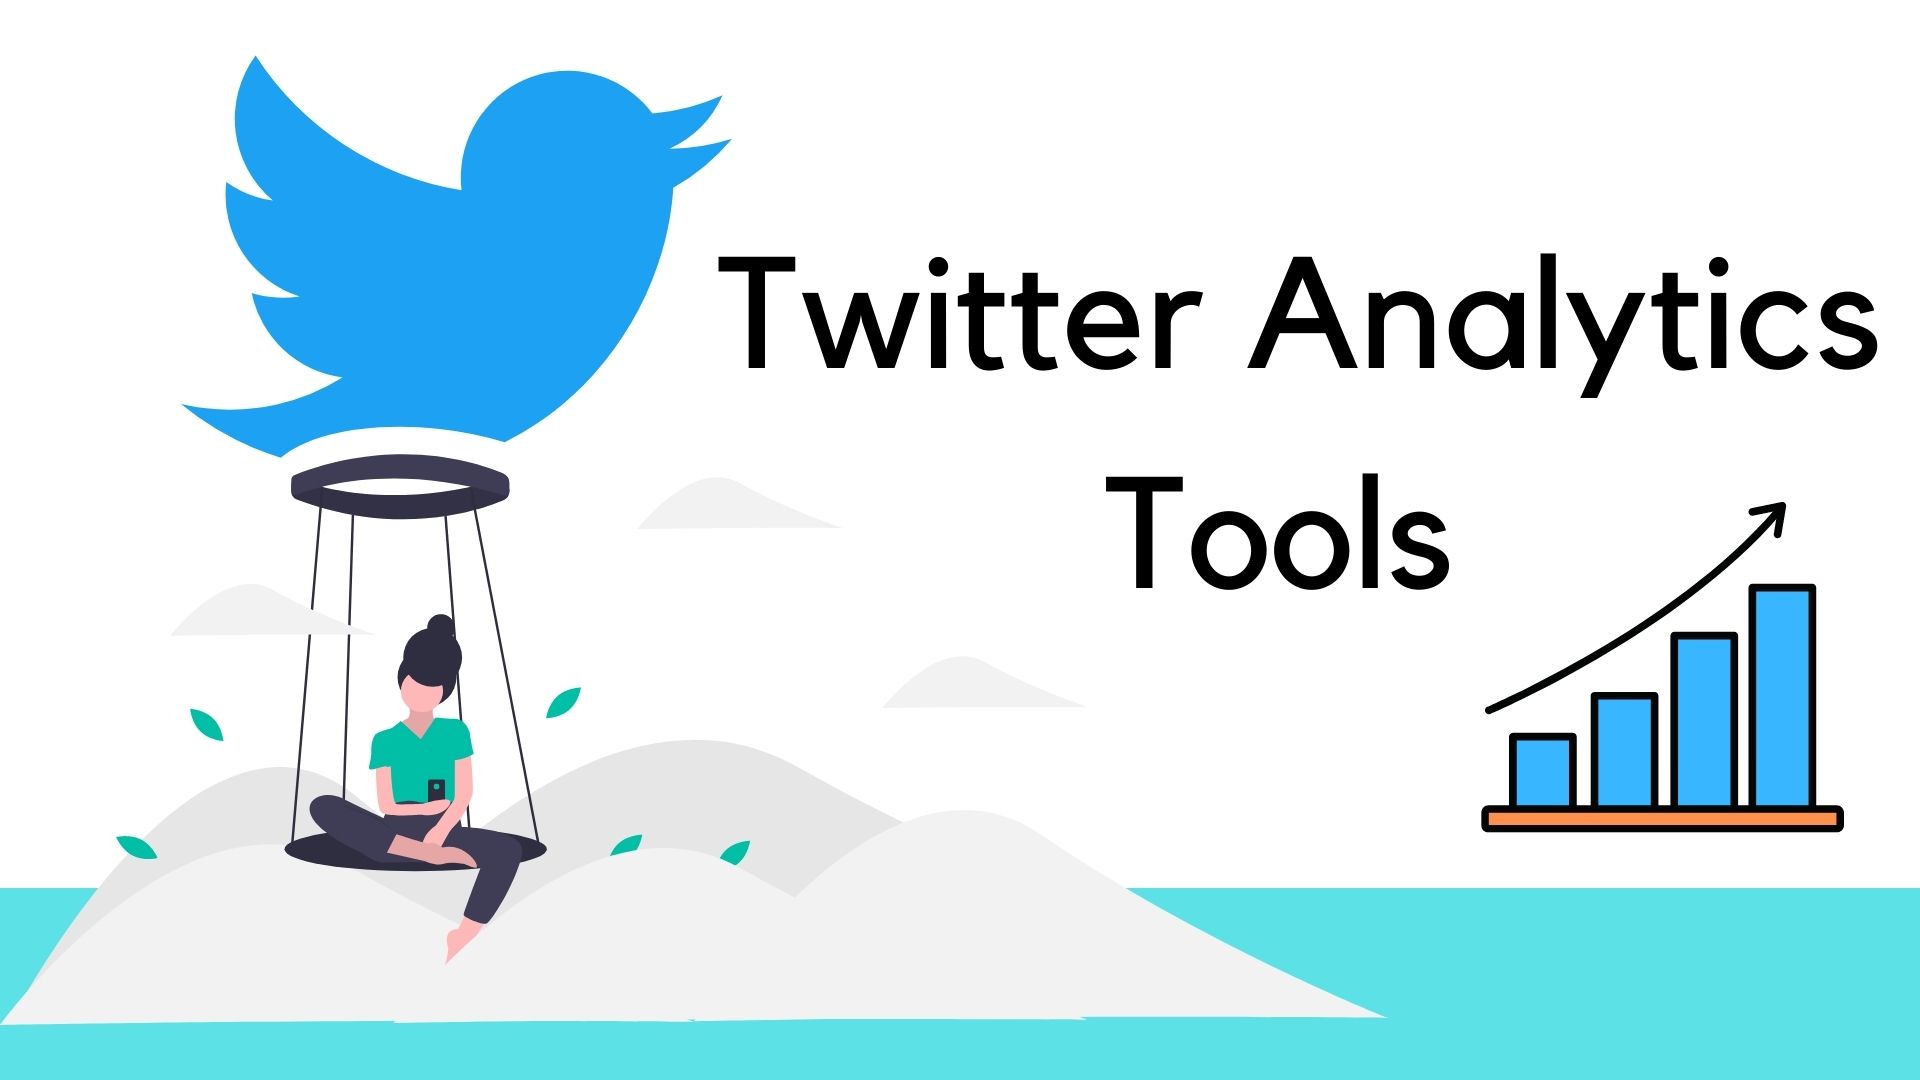 10 Twitter Analytics Tools to Use in 2023